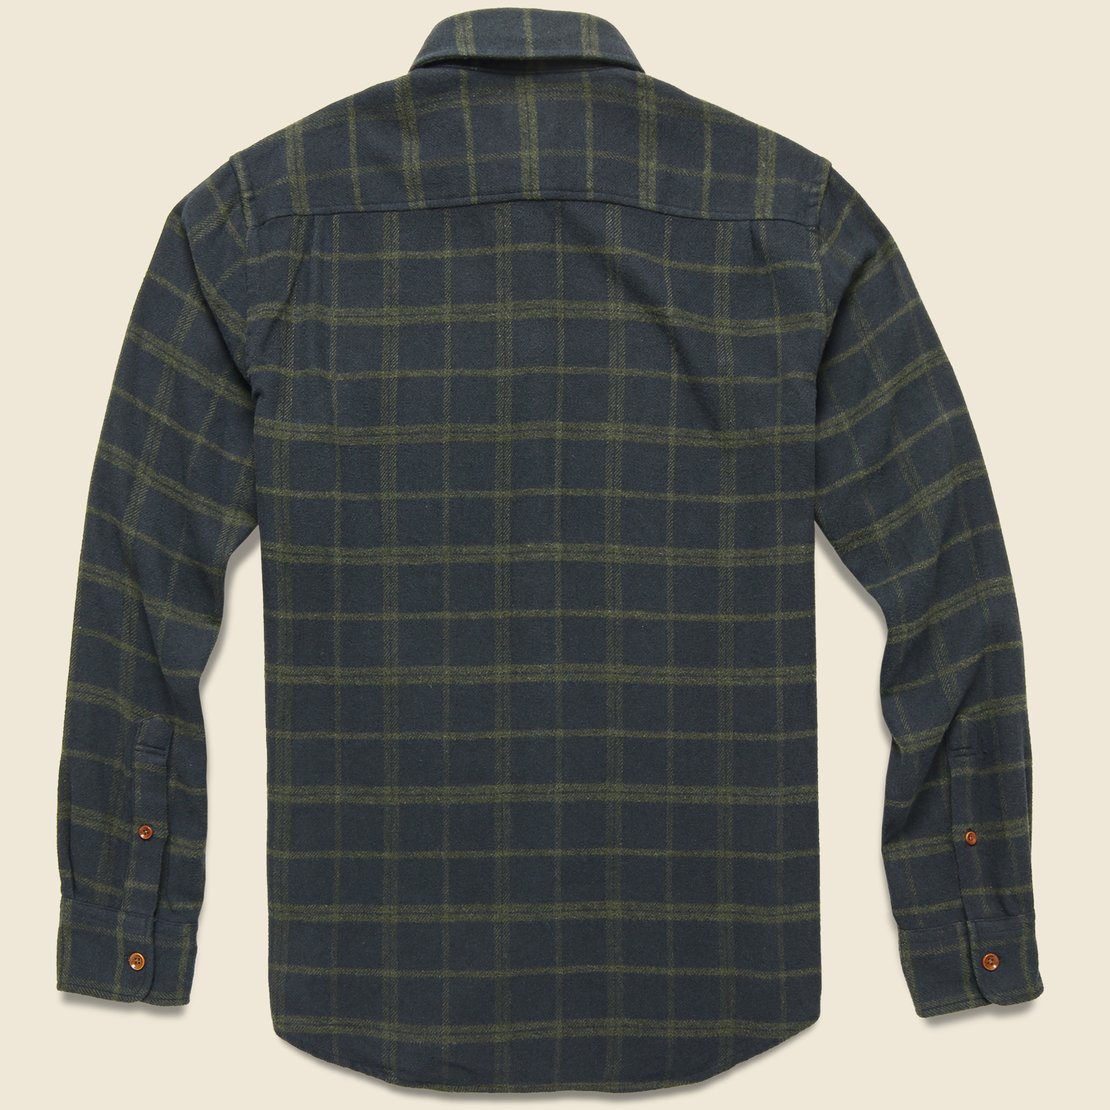 Seaview Shirt - Charcoal Olive Windowpane - Faherty - STAG Provisions - Tops - L/S Woven - Plaid